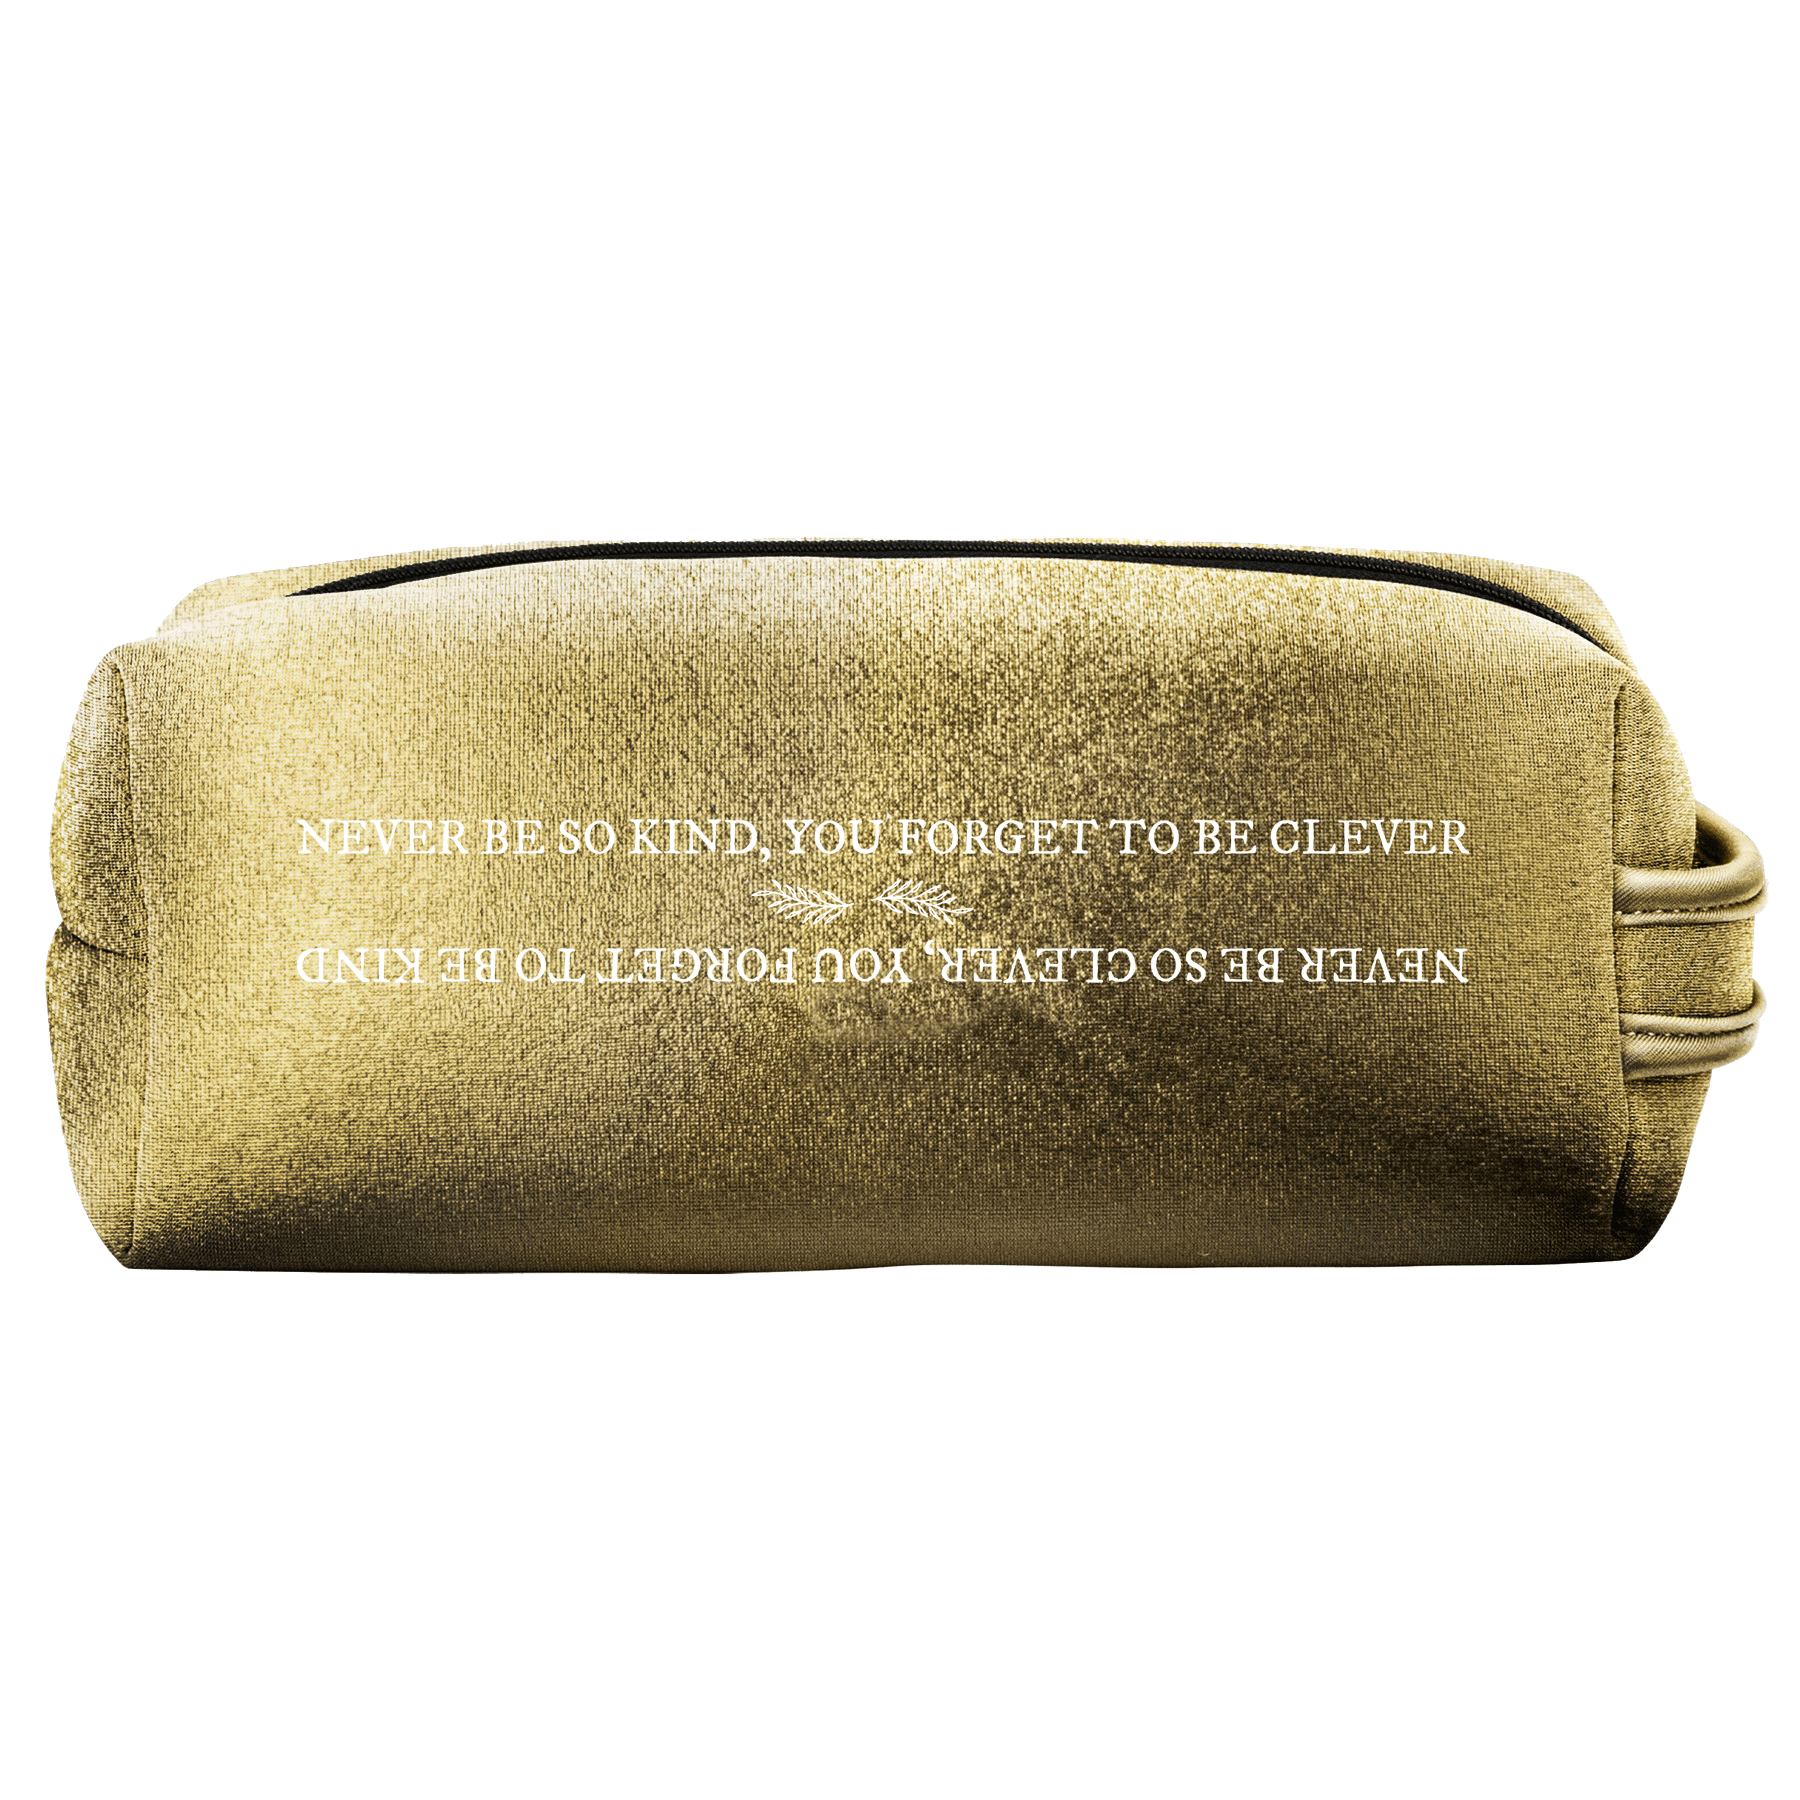 is er hemel George Bernard Taylor Swift "Never Be So Kind, You Forget To Be Clever" Cosmetic Bag -  Walmart.com